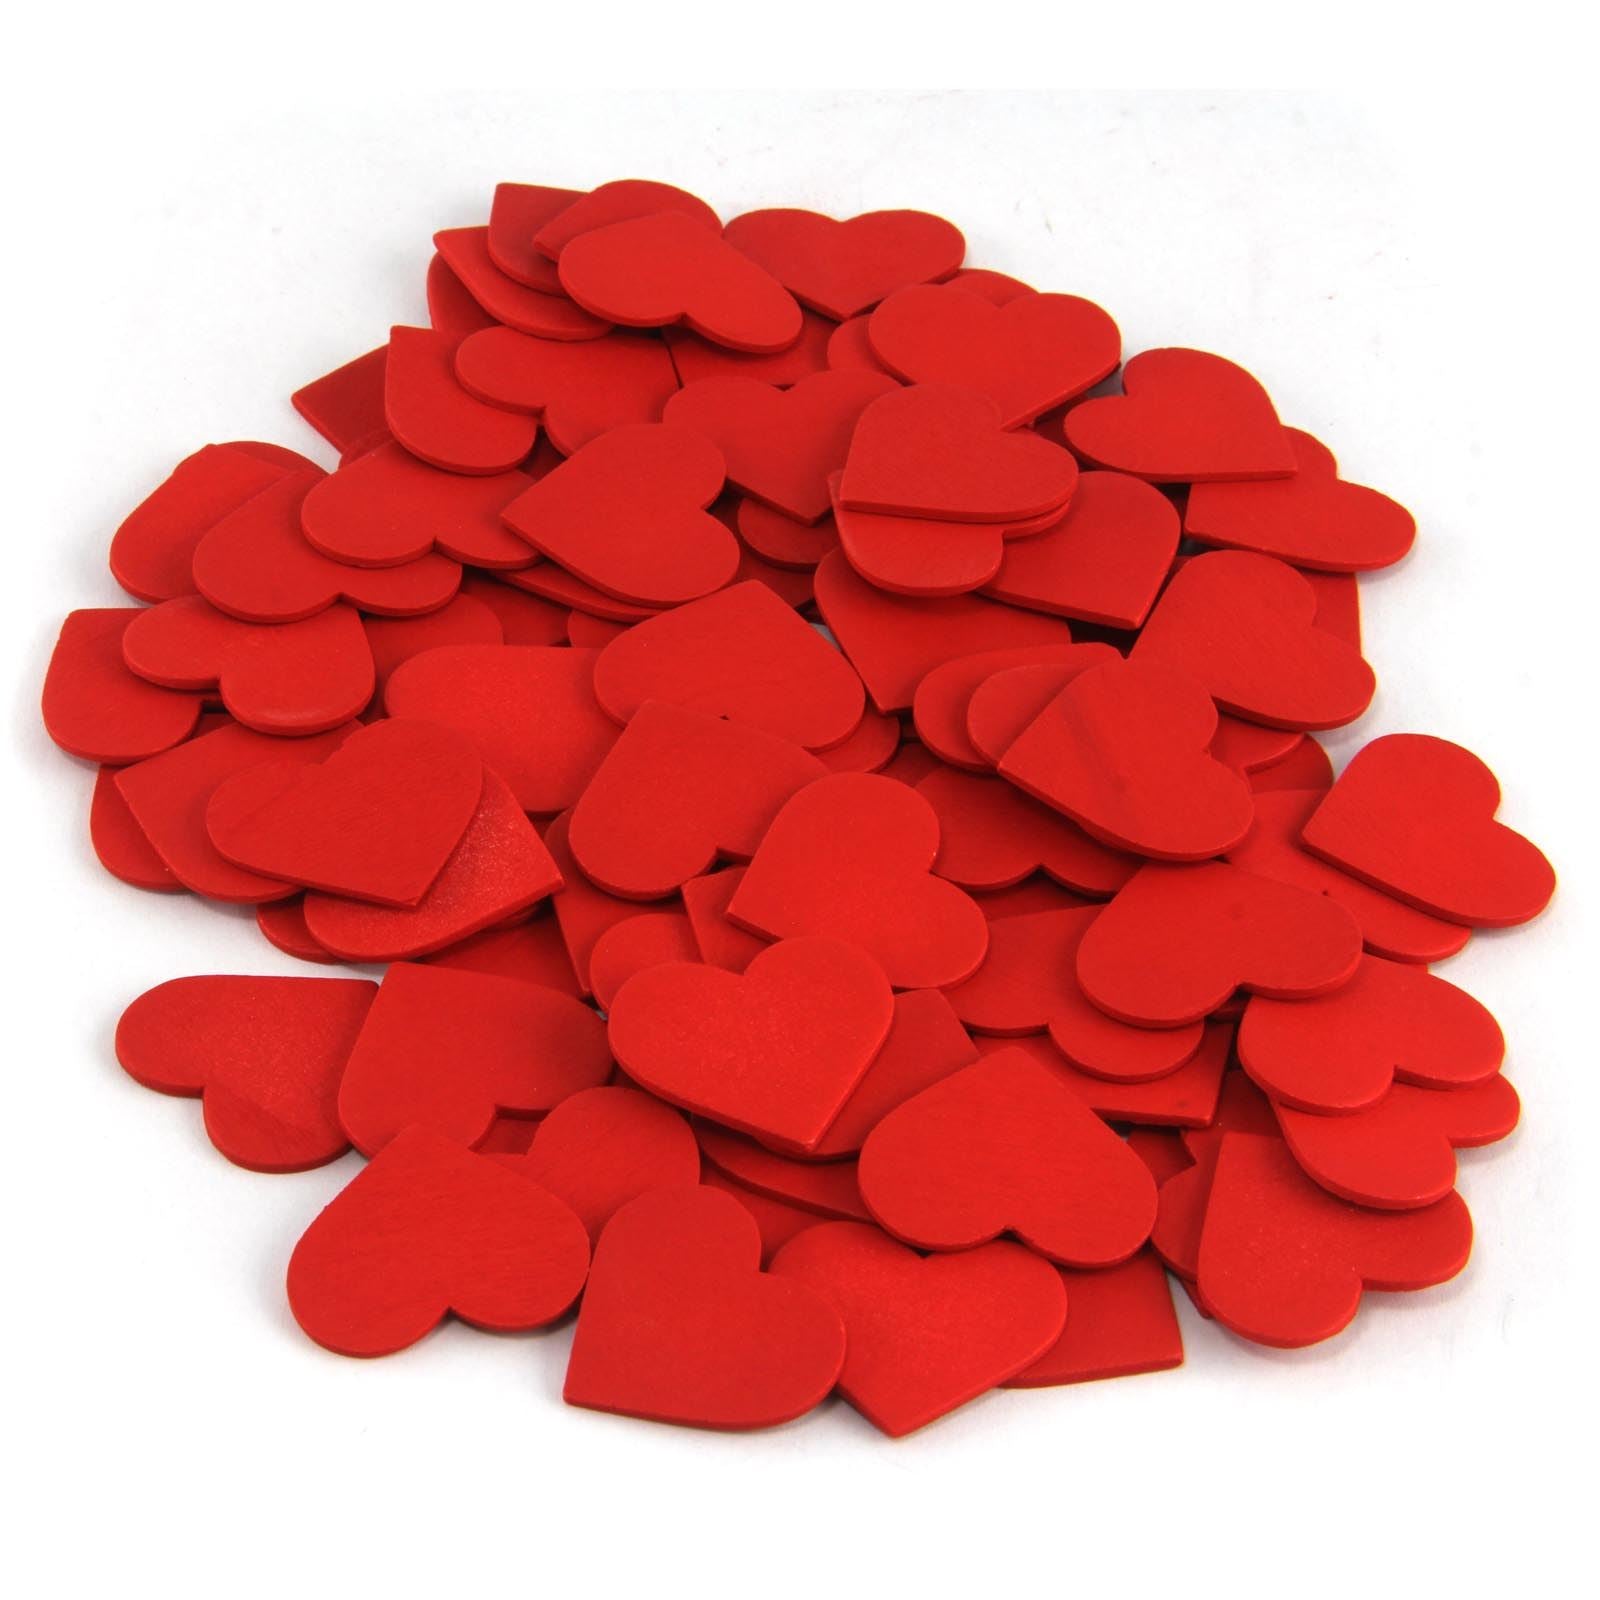 30mm Wooden Red Heart Embellishments